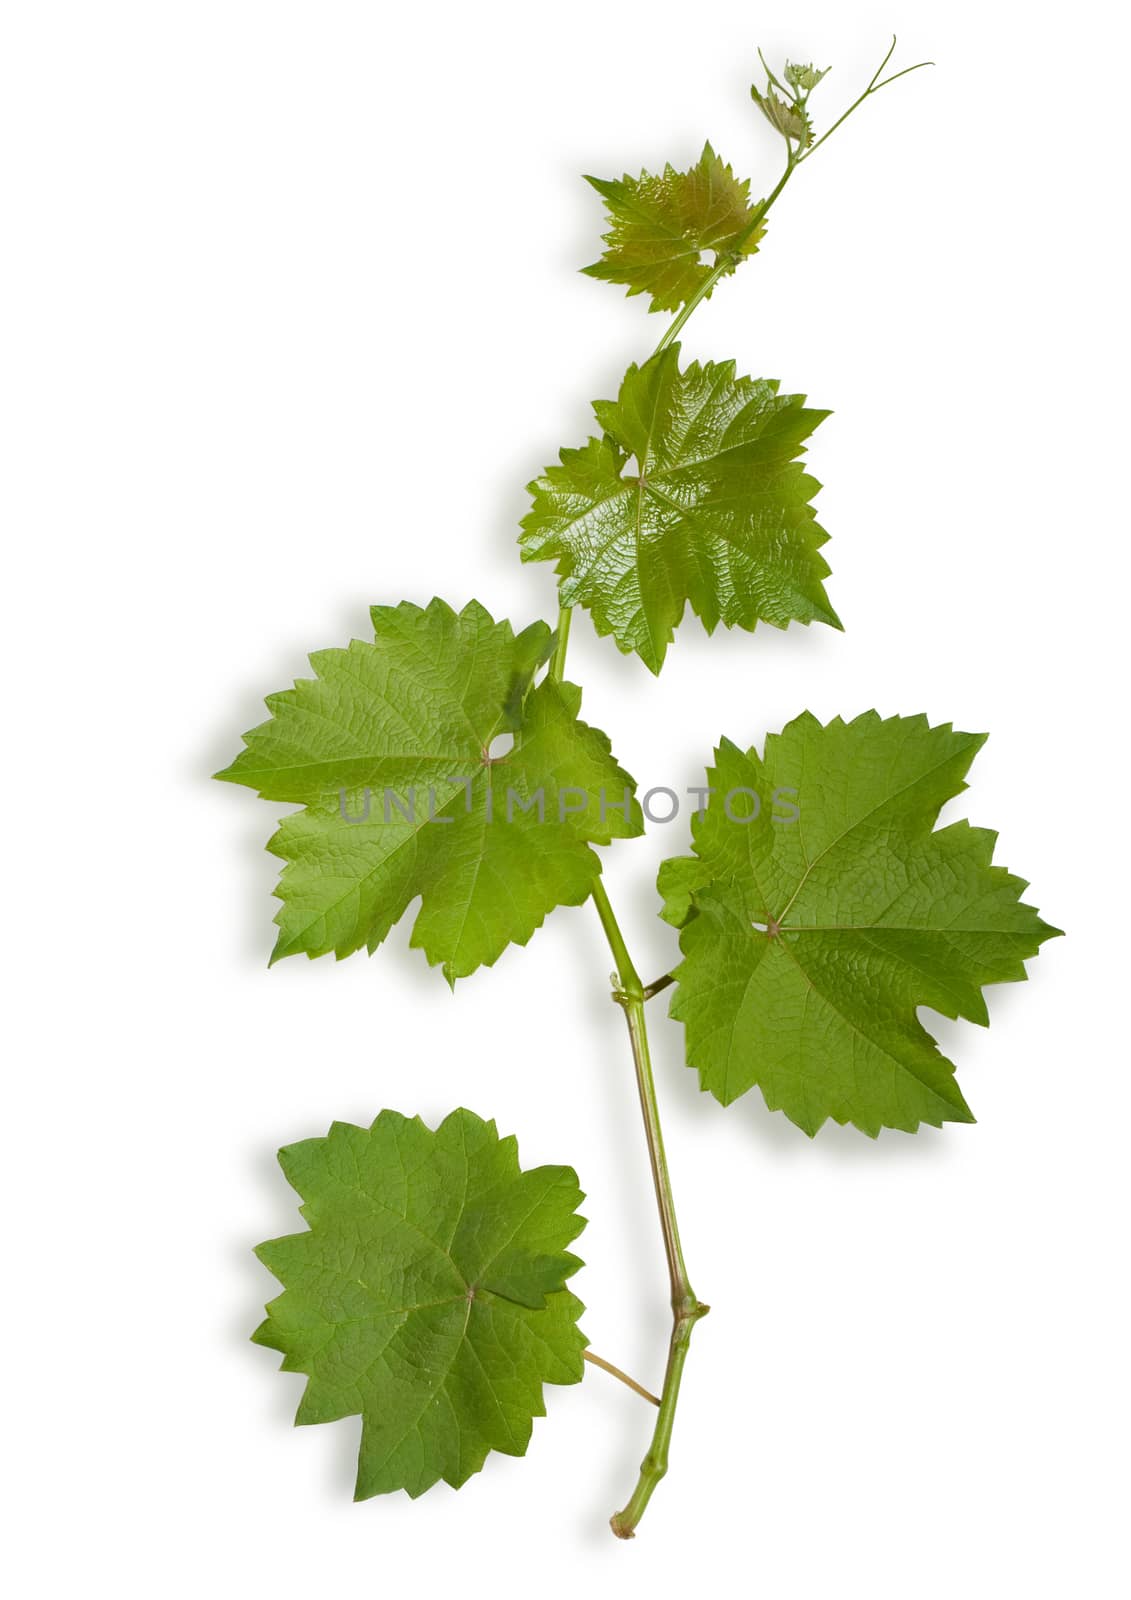 Spring young leaves of grape isolatedwith clipping path